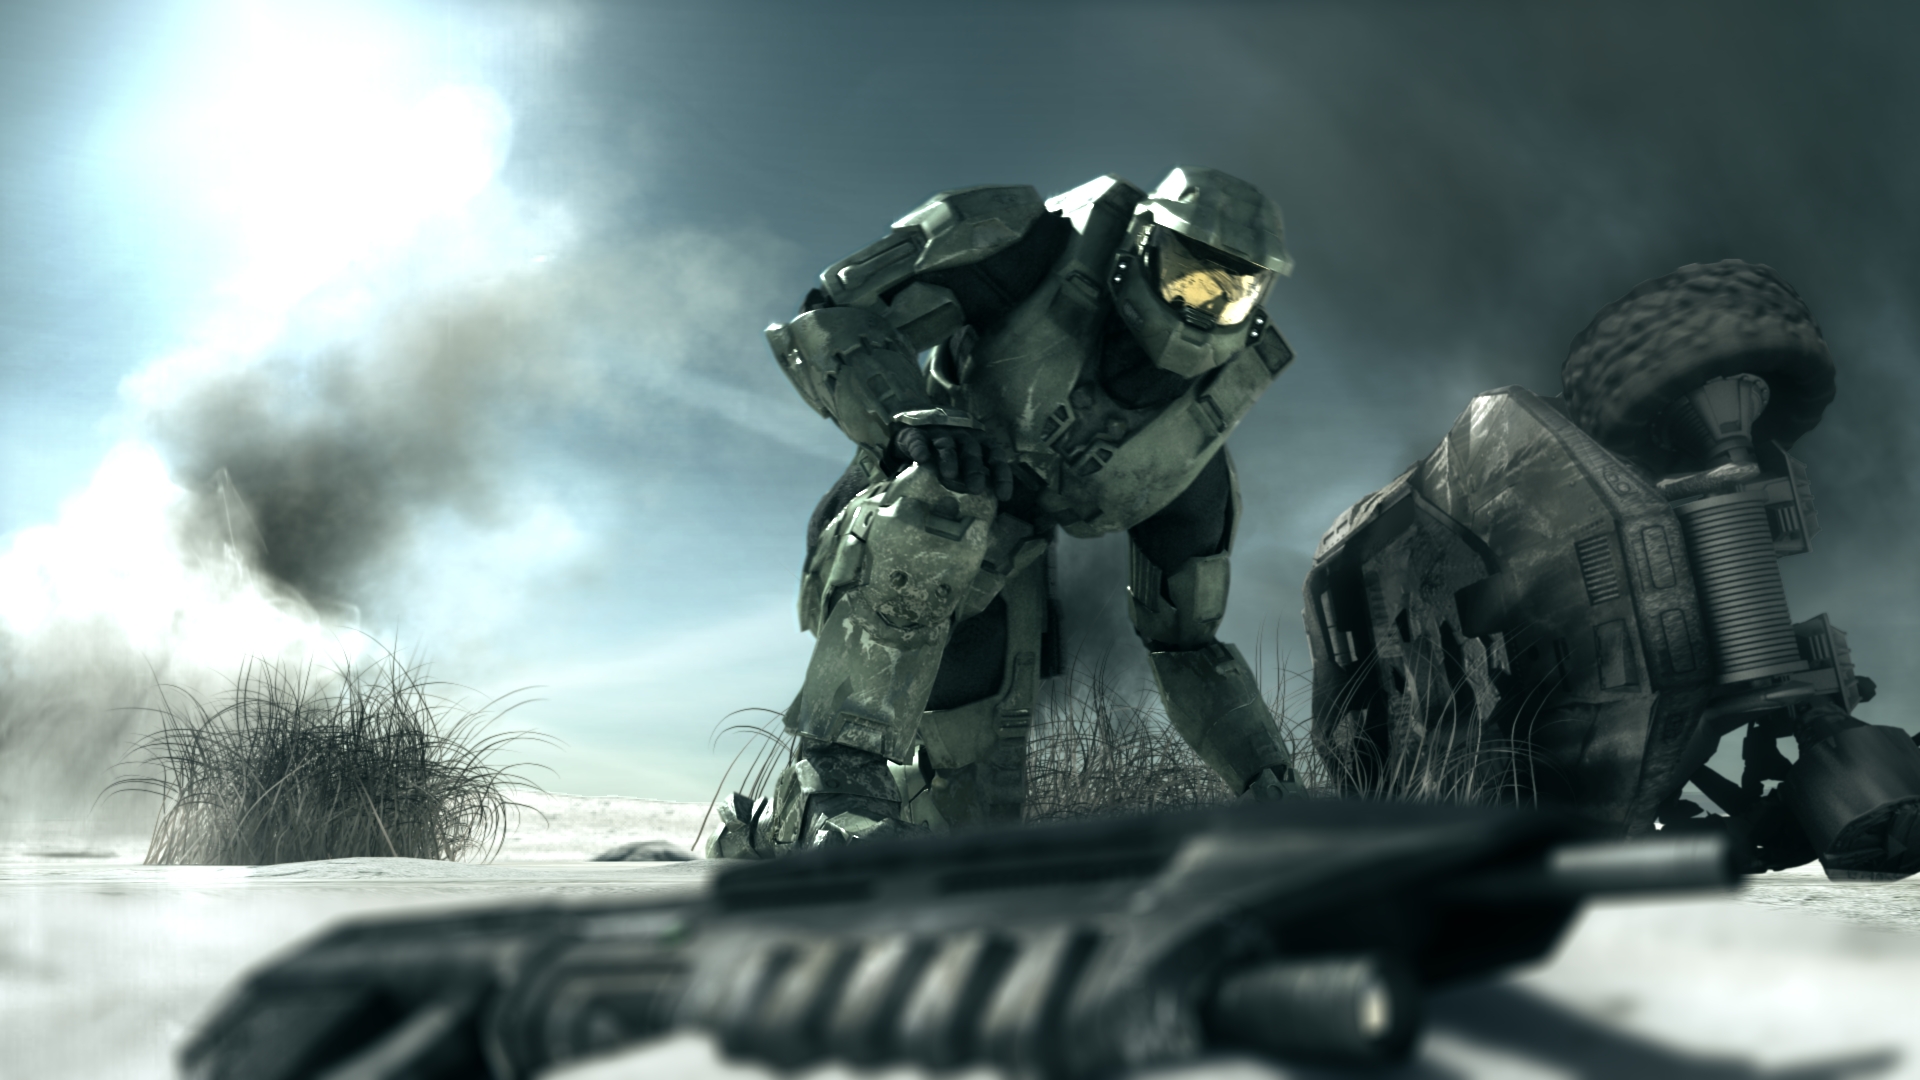 halo wallpaper,action adventure game,pc game,soldier,shooter game,military